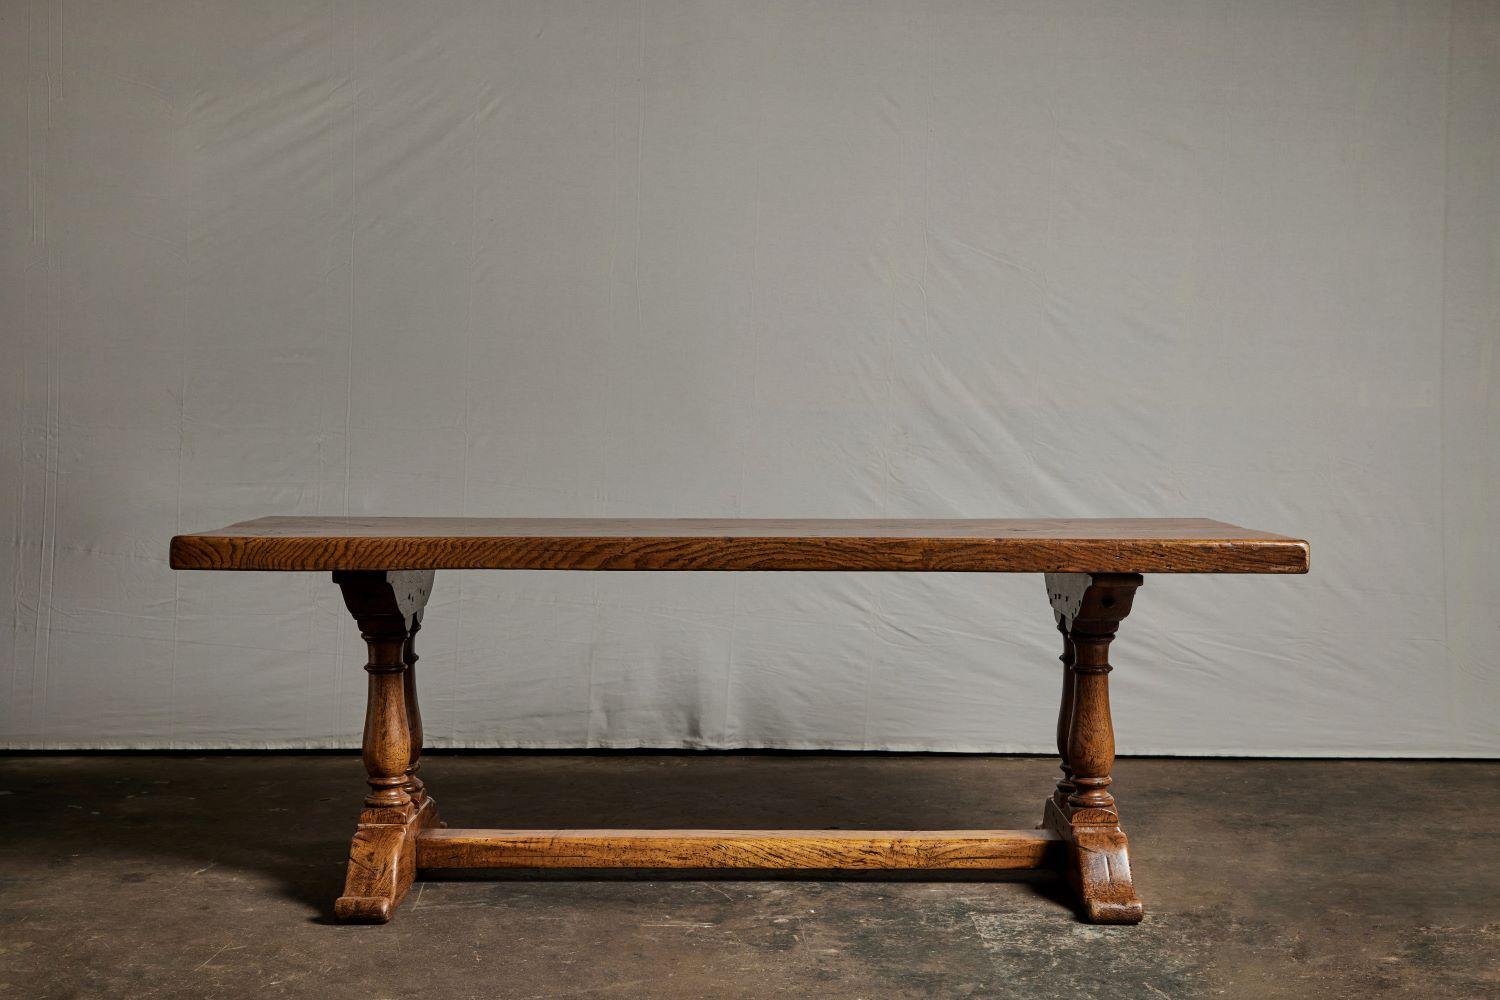 19th century style French oak dining table with a single oak plank top.